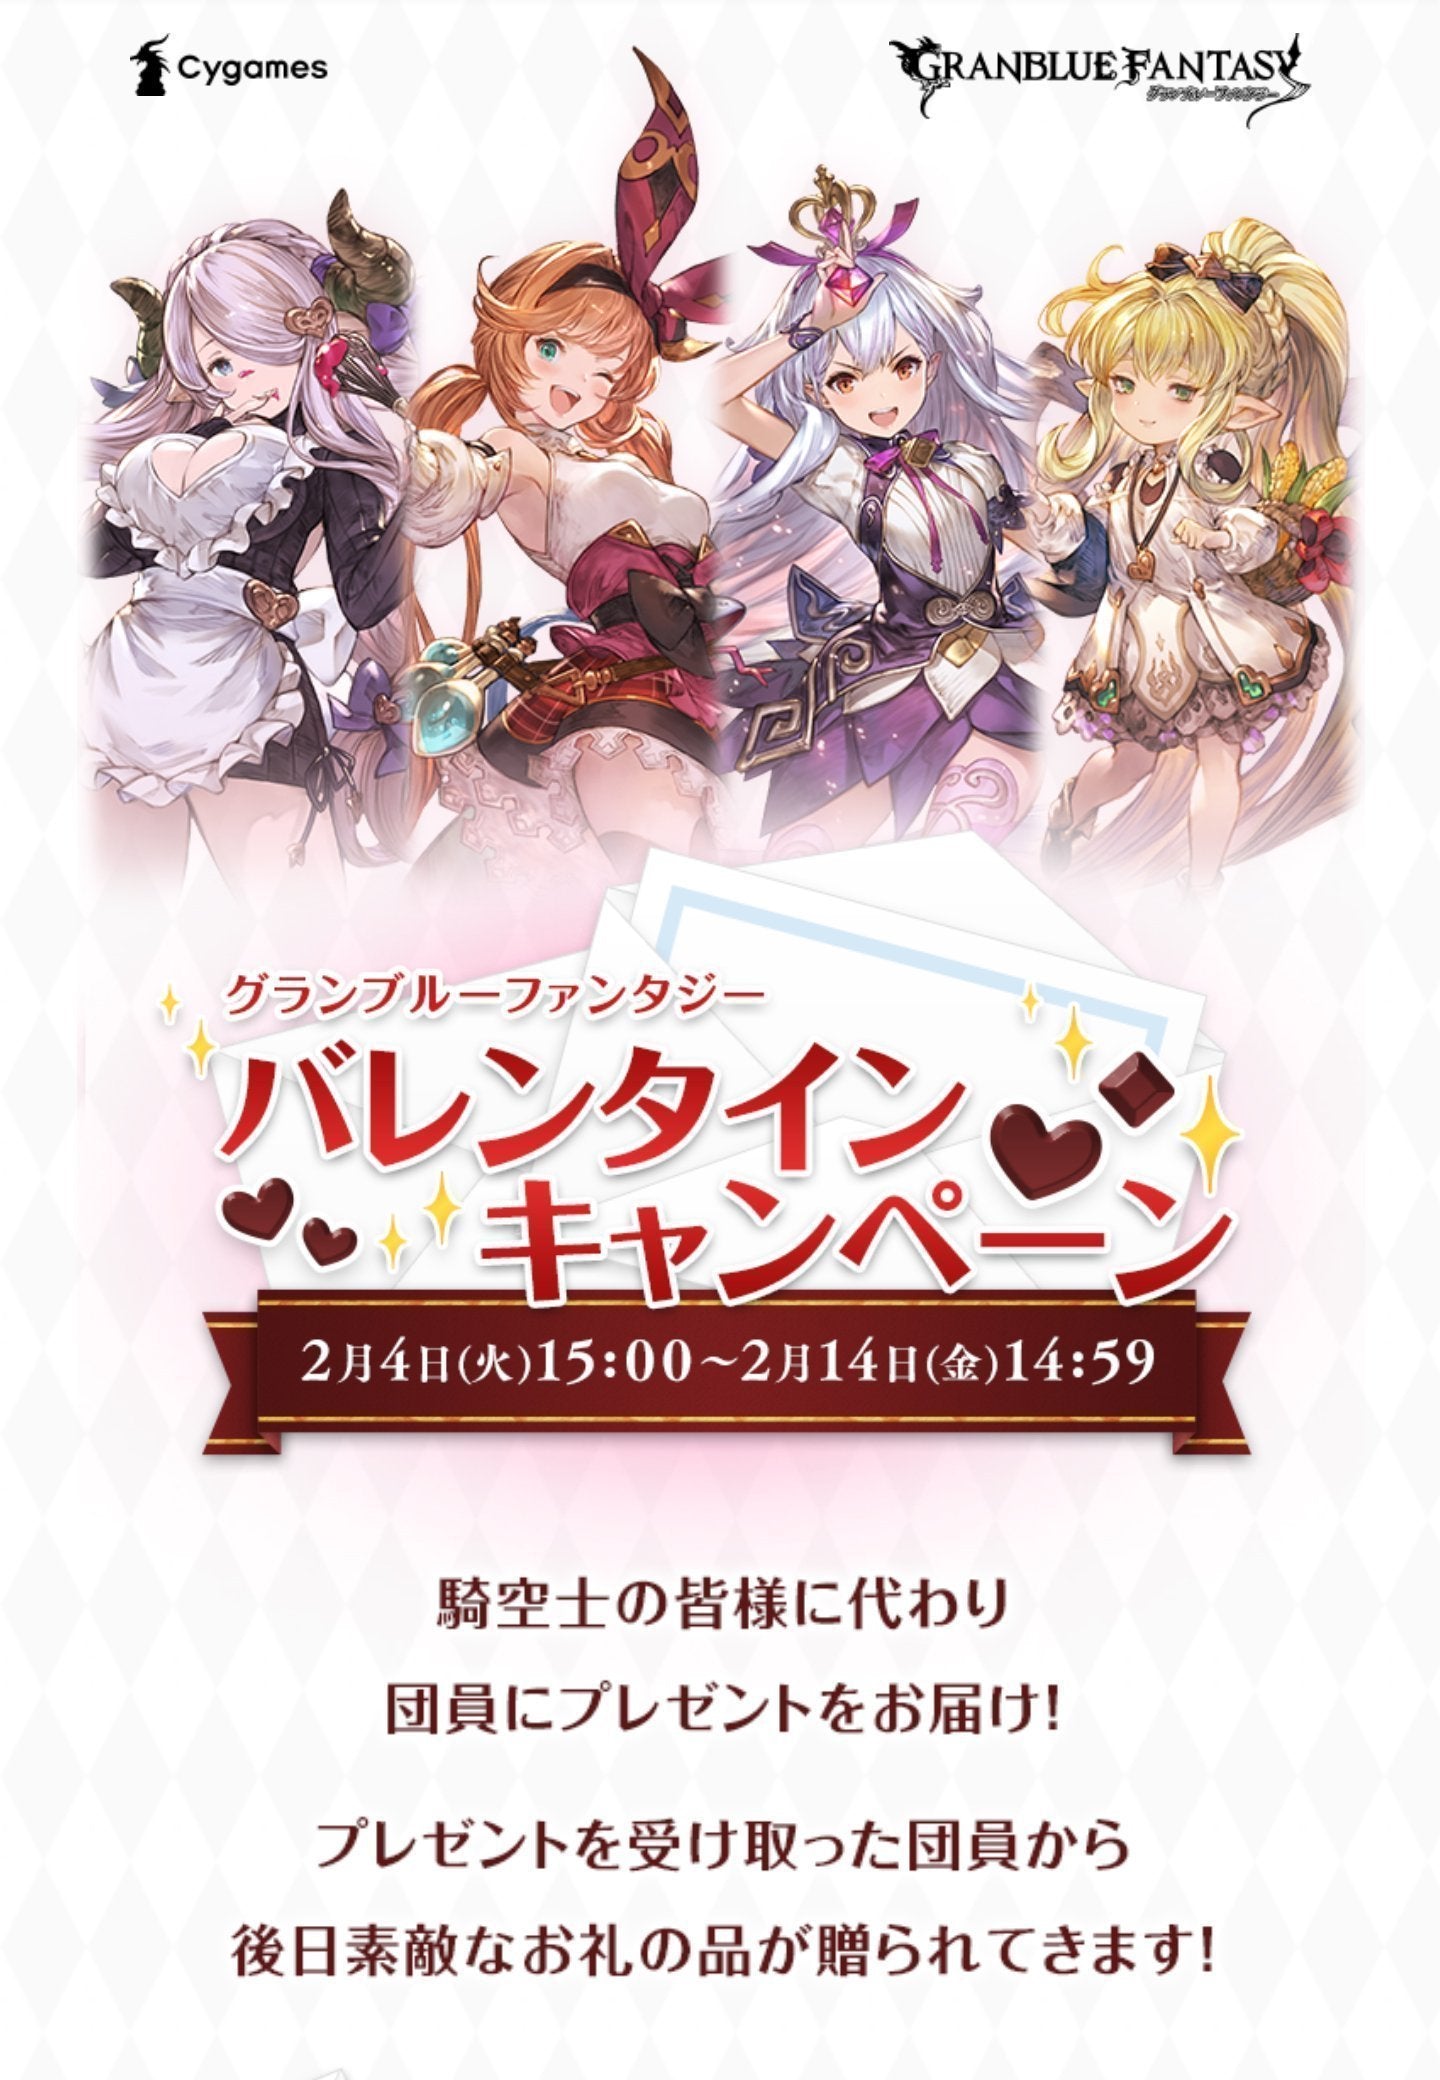 Granblue Fantasy Valentine White Day Character Specific Thank You Postcard And Portrait Item